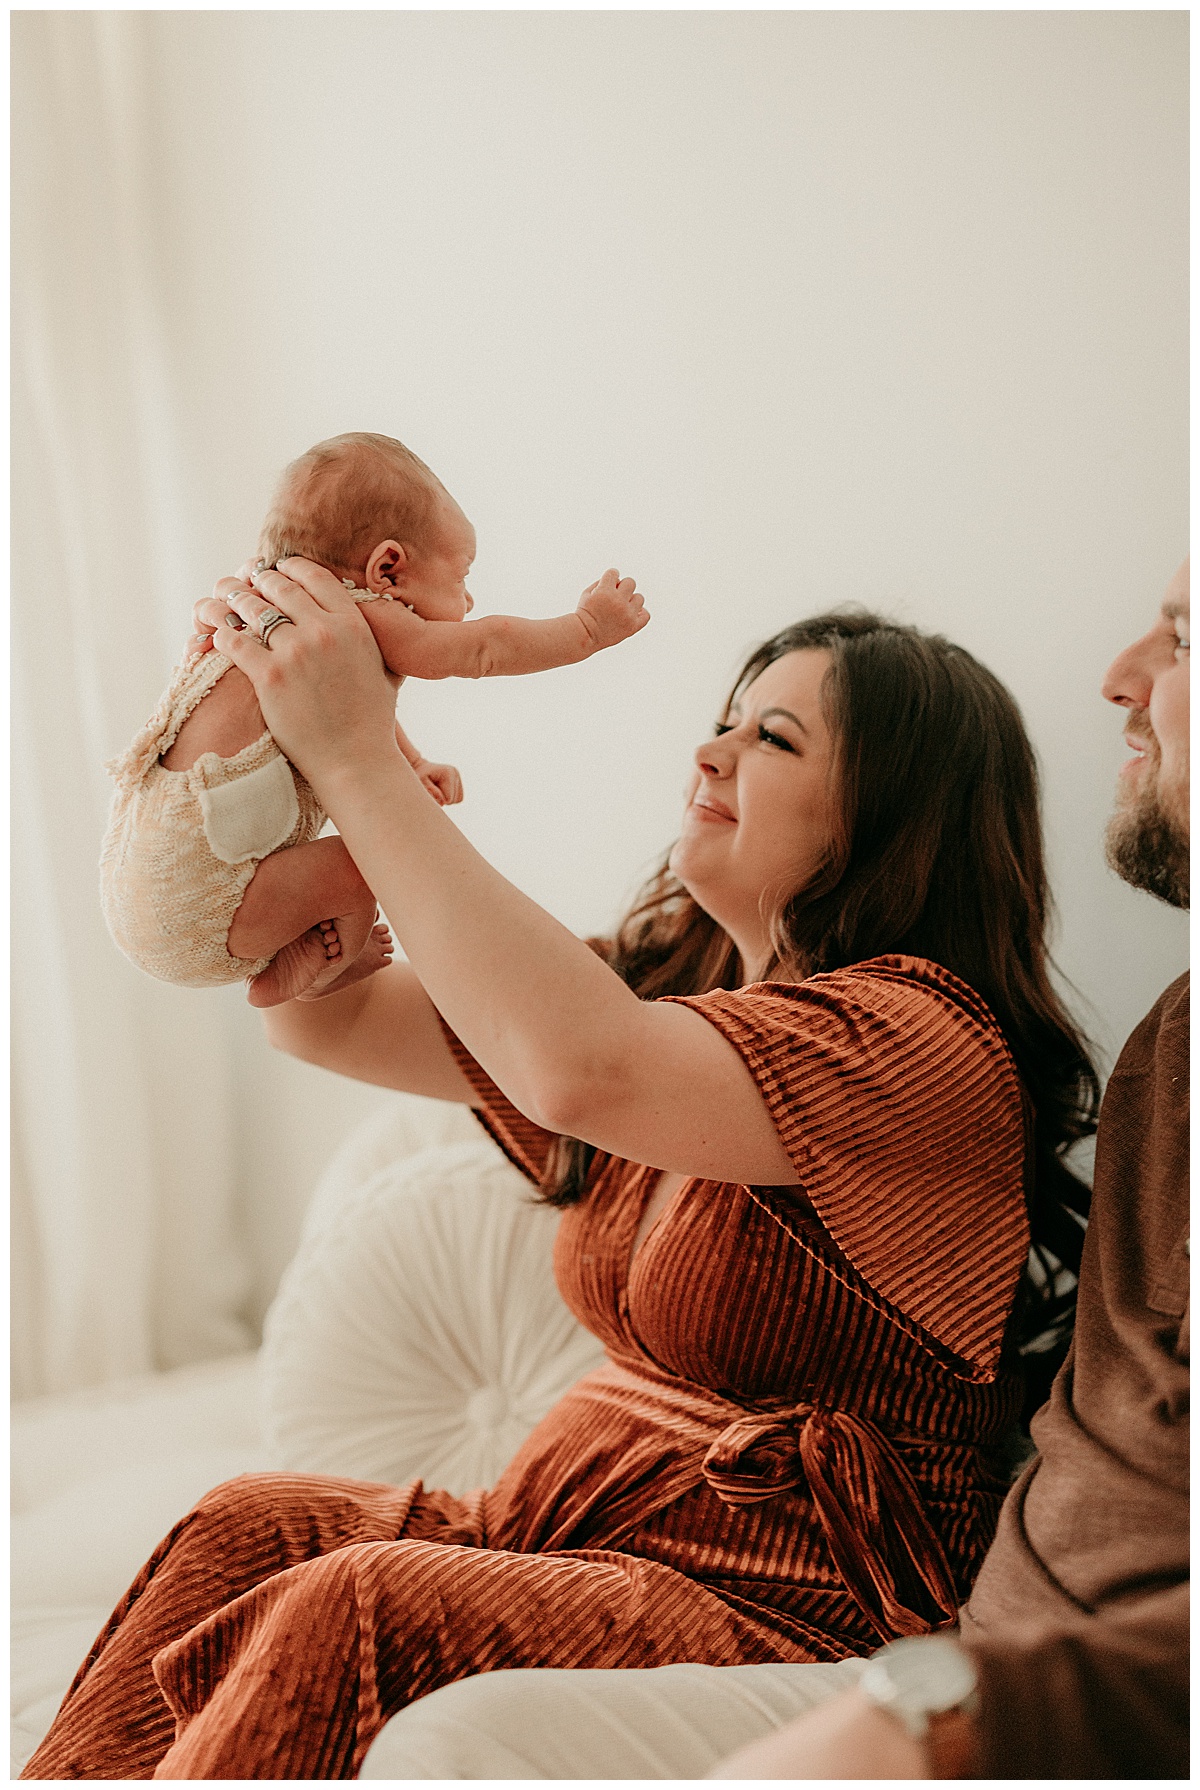 Infant is held by parents for Intimate Studio Newborn Session